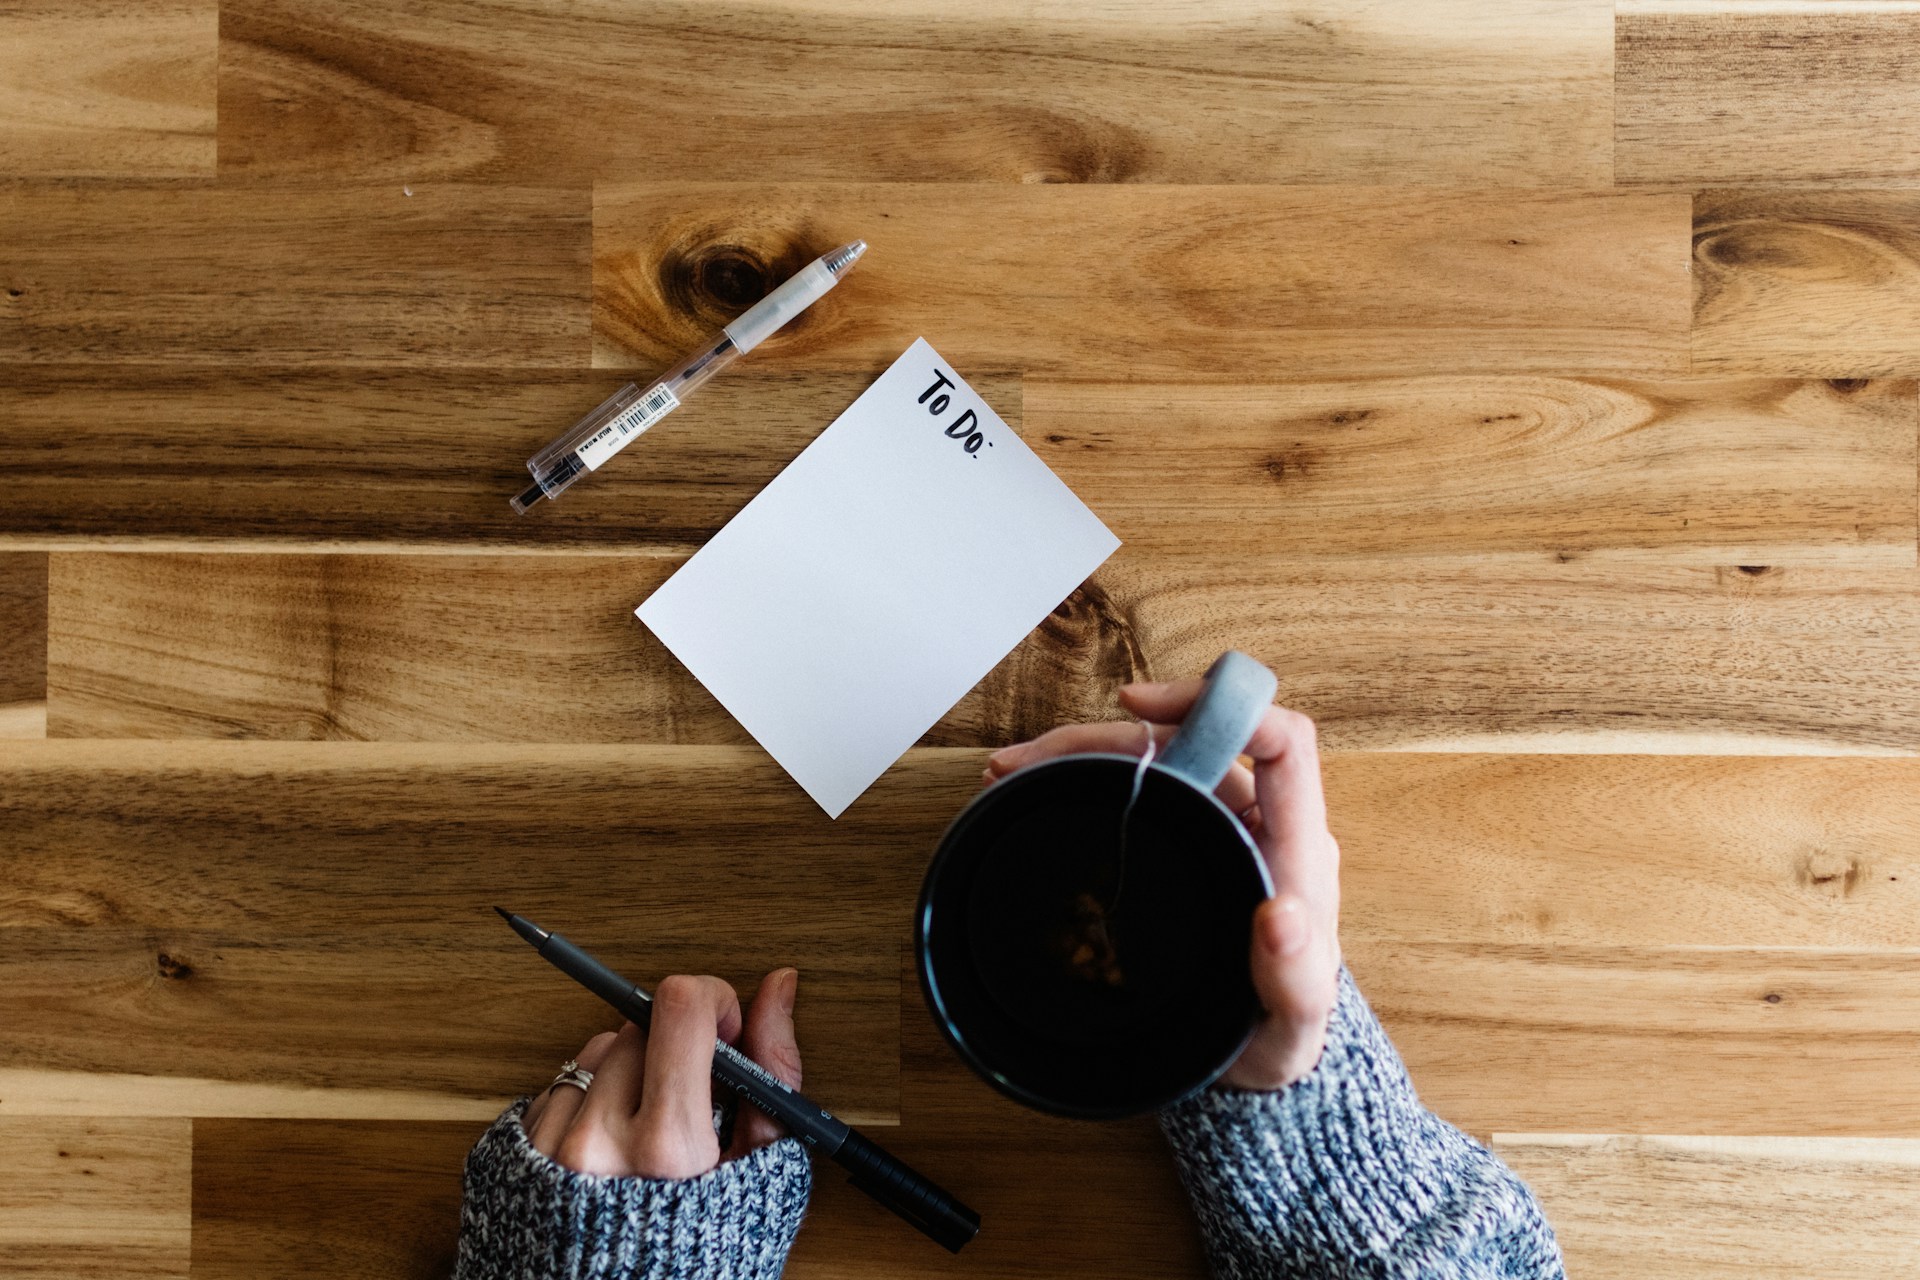 A woman with a cup of tea, two pens and a blank To Do List on the table in front of her.